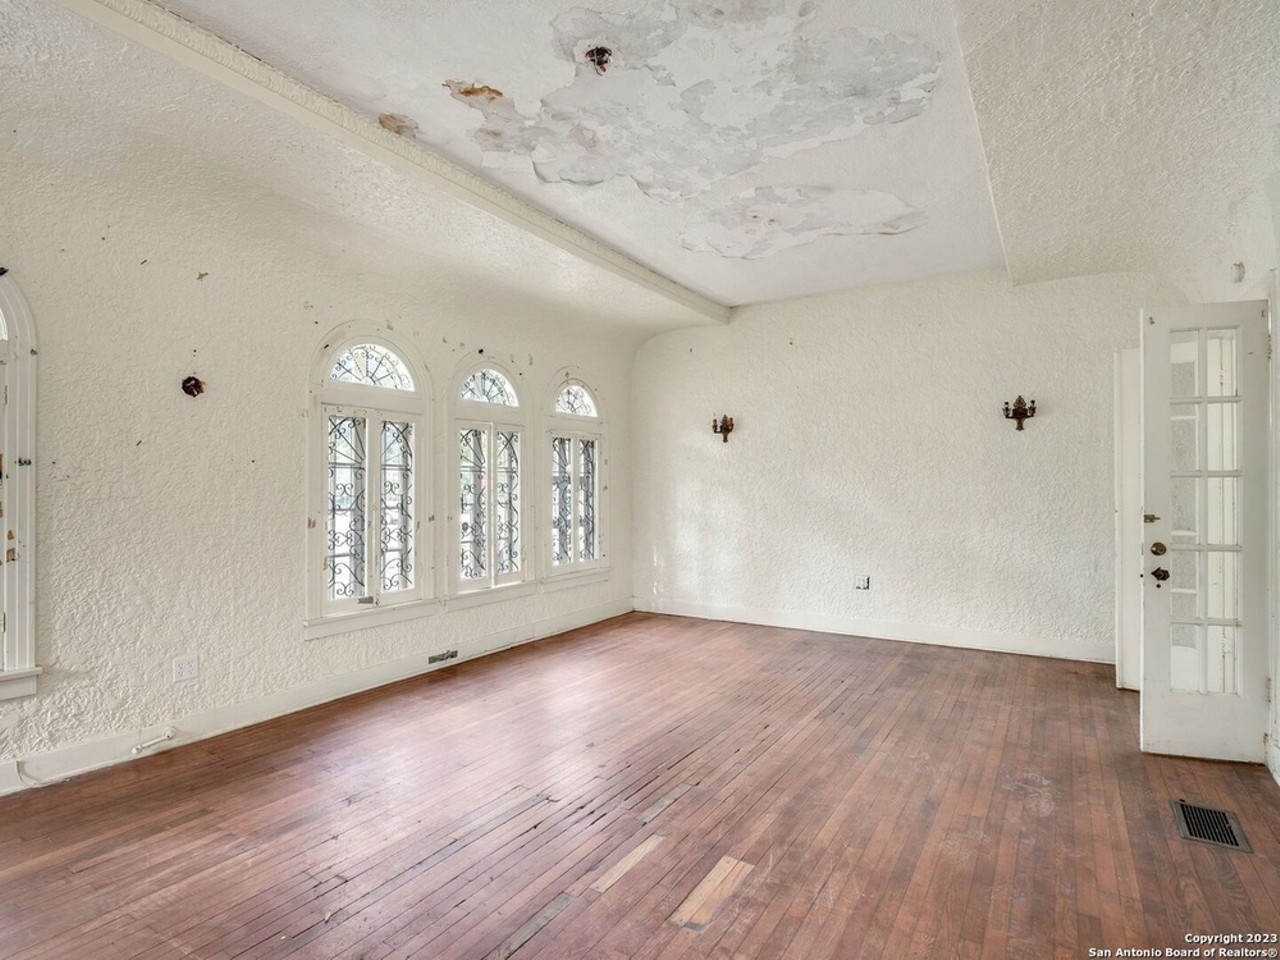 A 1927 San Antonio home build by the Alameda Theater's architect is back on the market